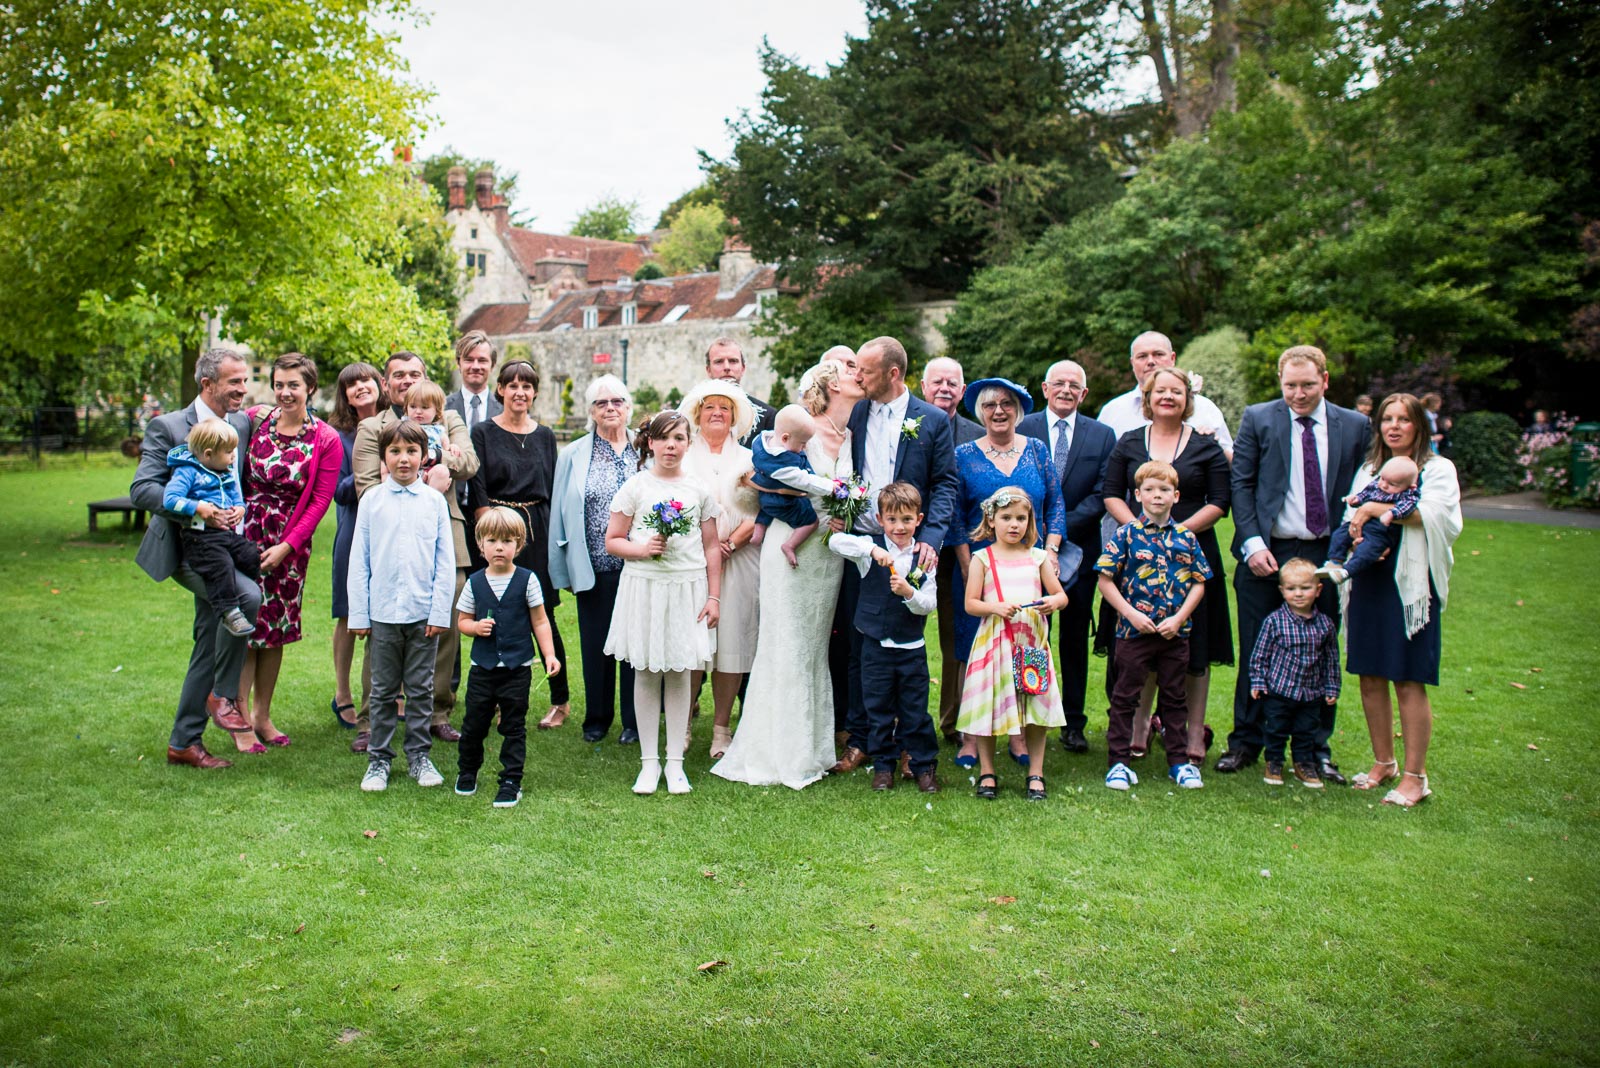 Emily and Richard pose with wedding guests in Southover Grange, Lewes